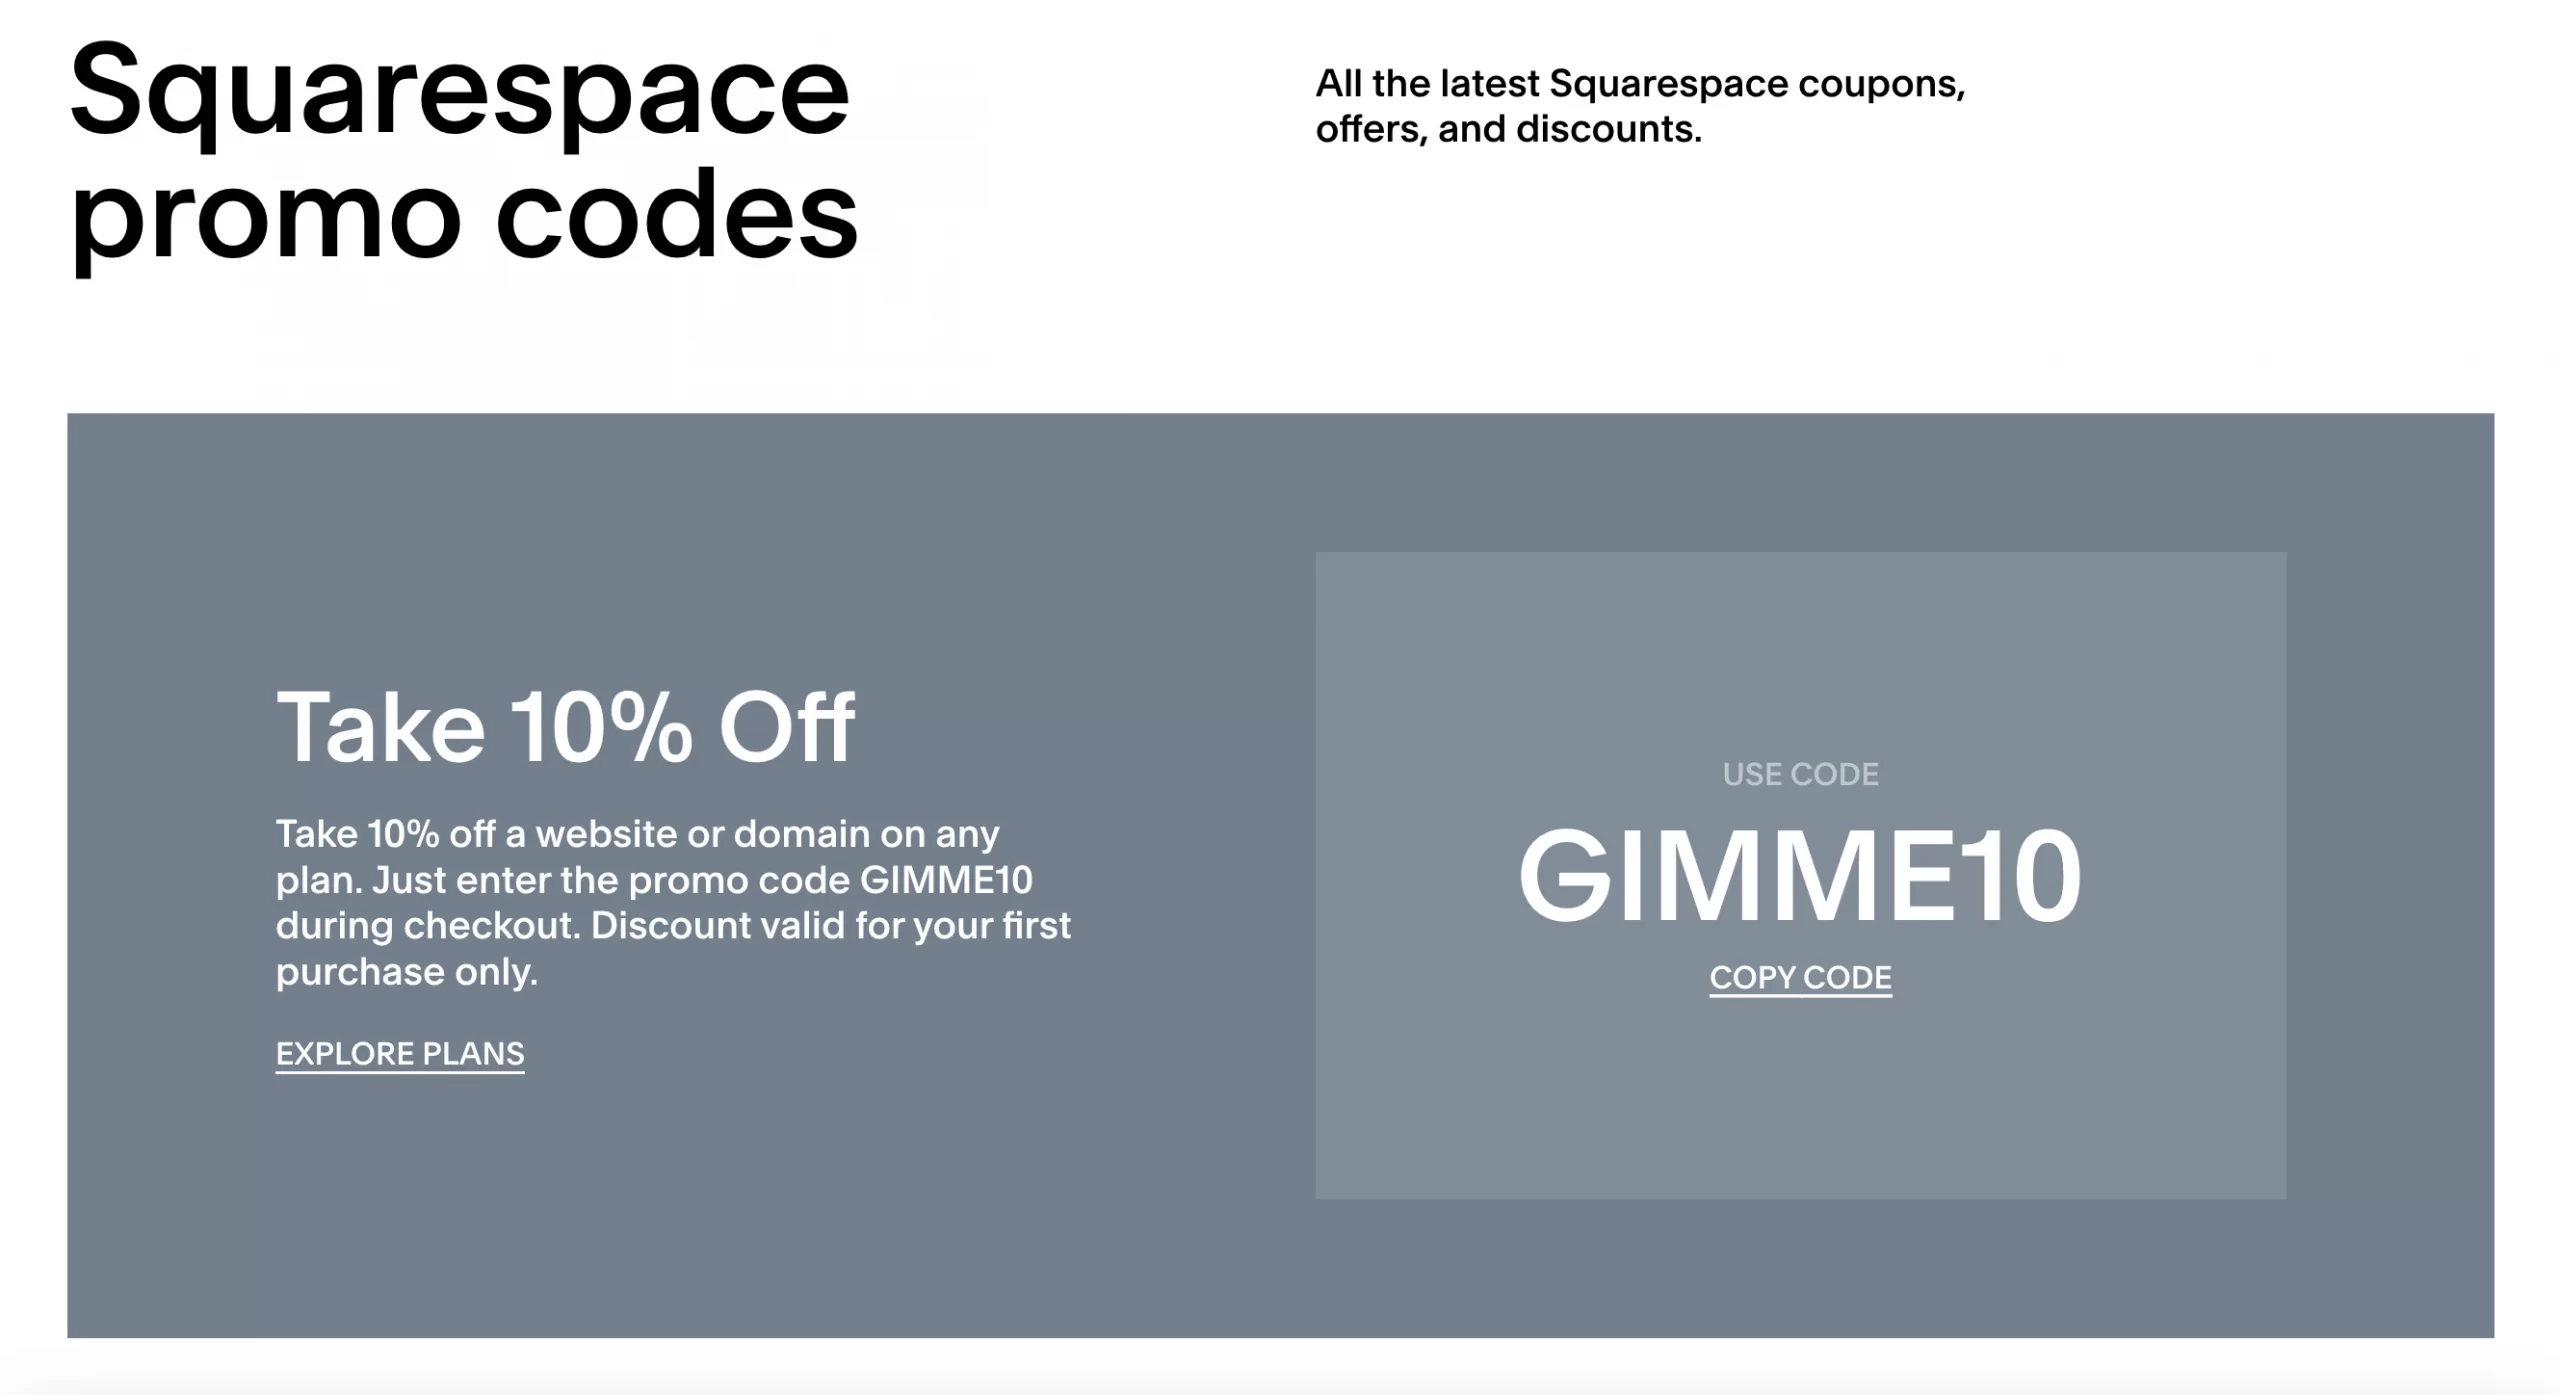 Promotion code apply for all Squarespace pricing plan